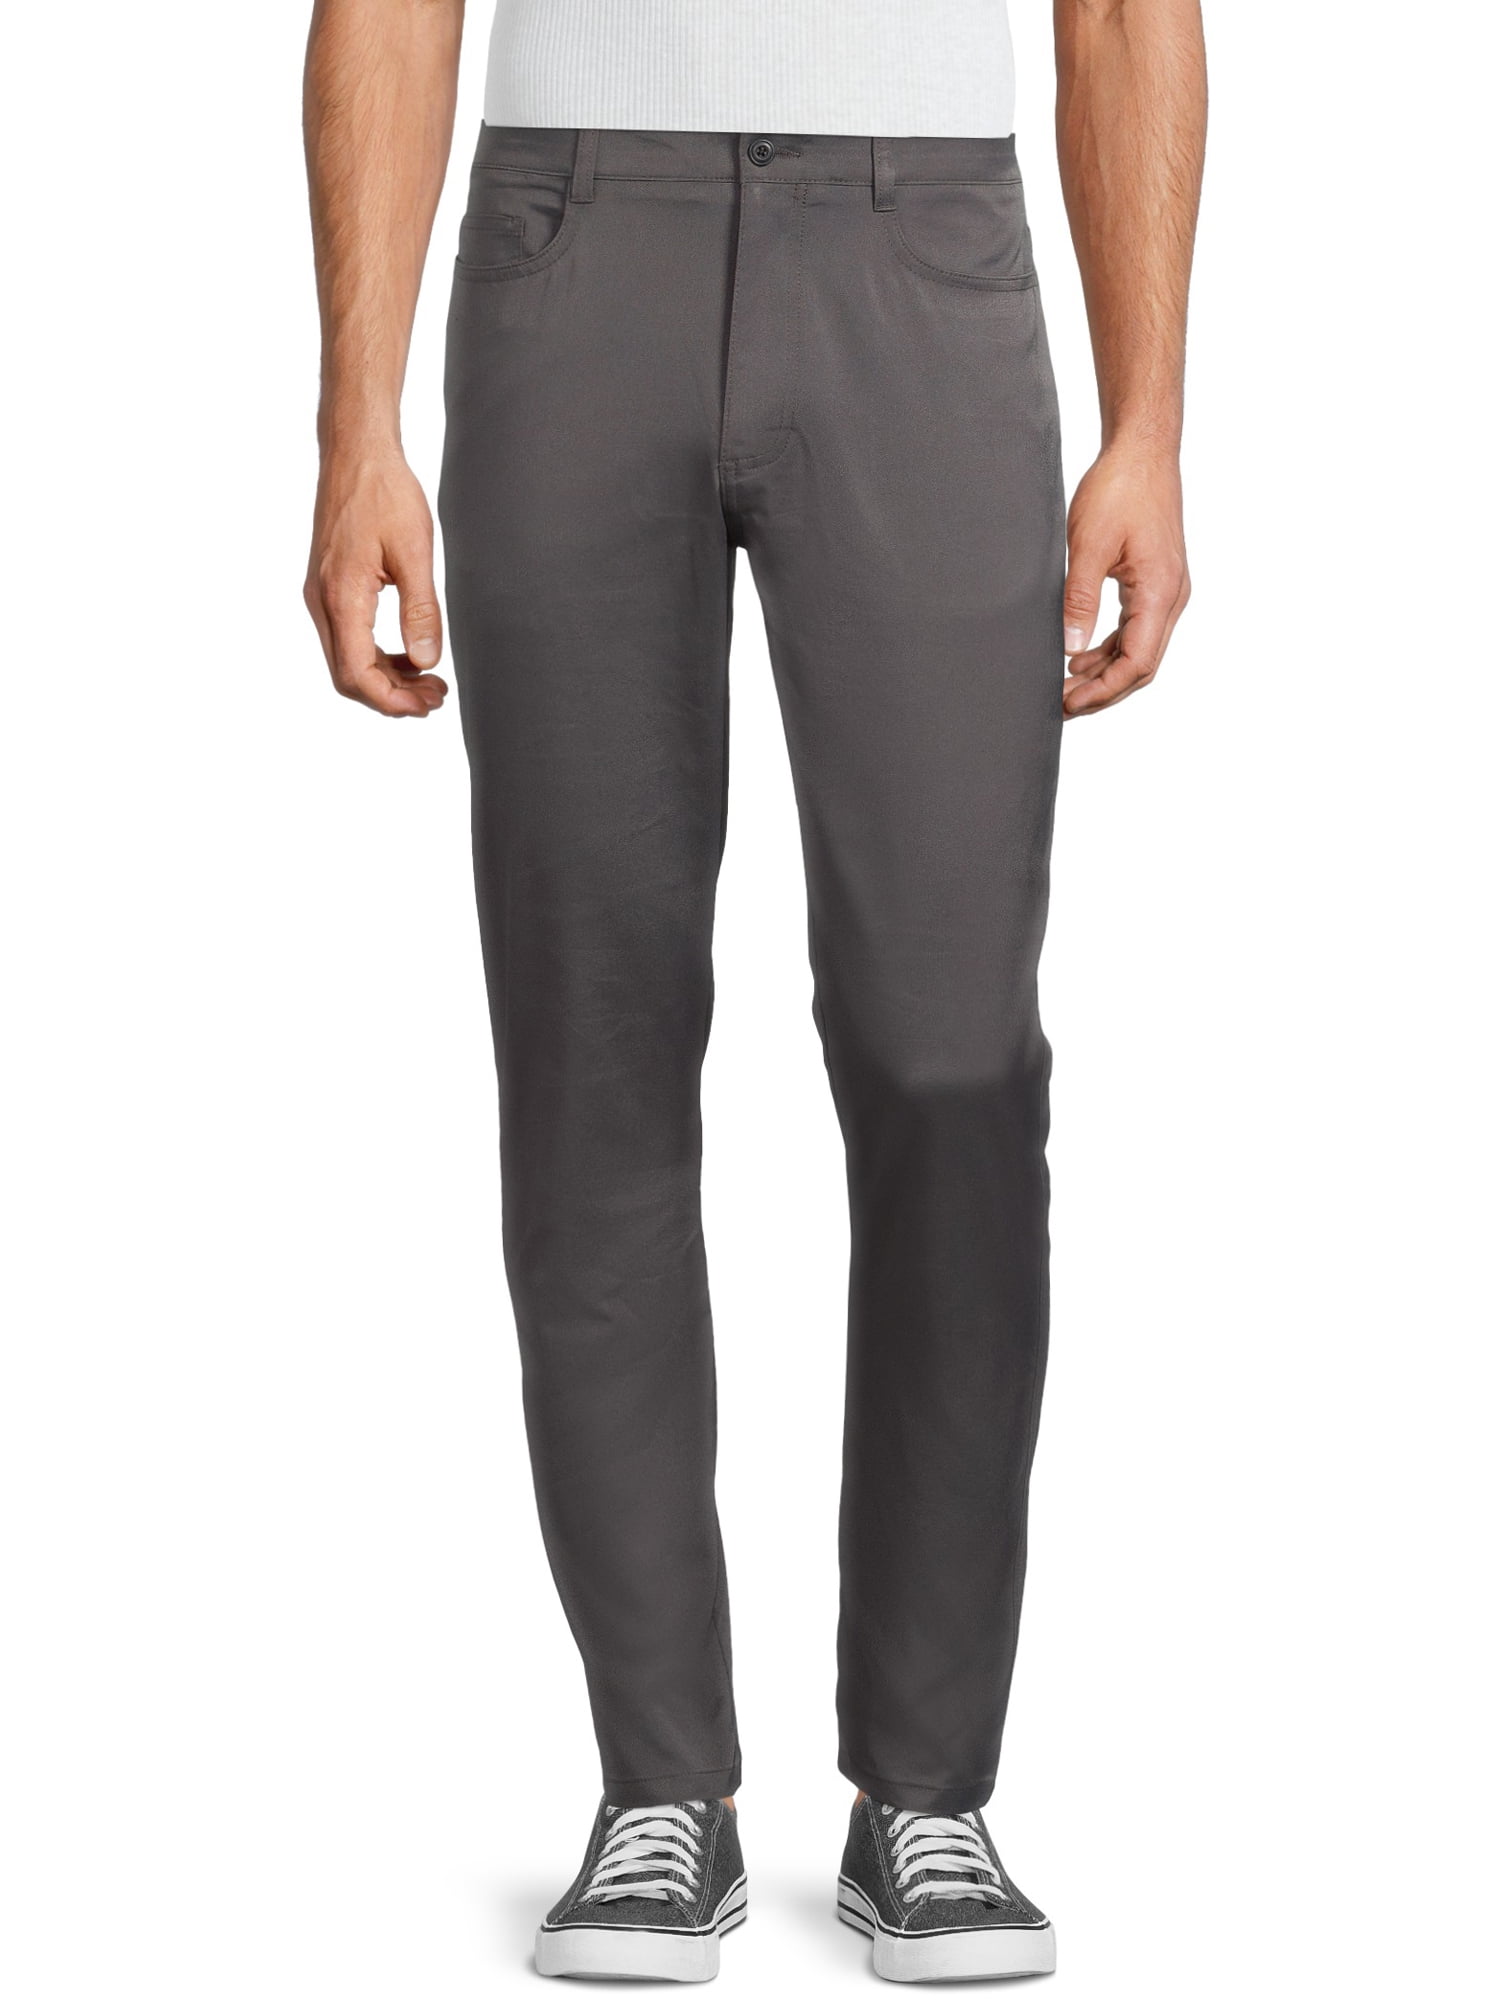 Ben Hogan Men's Performance 5 Pocket Pant With Stretch Fabric and Waist ...